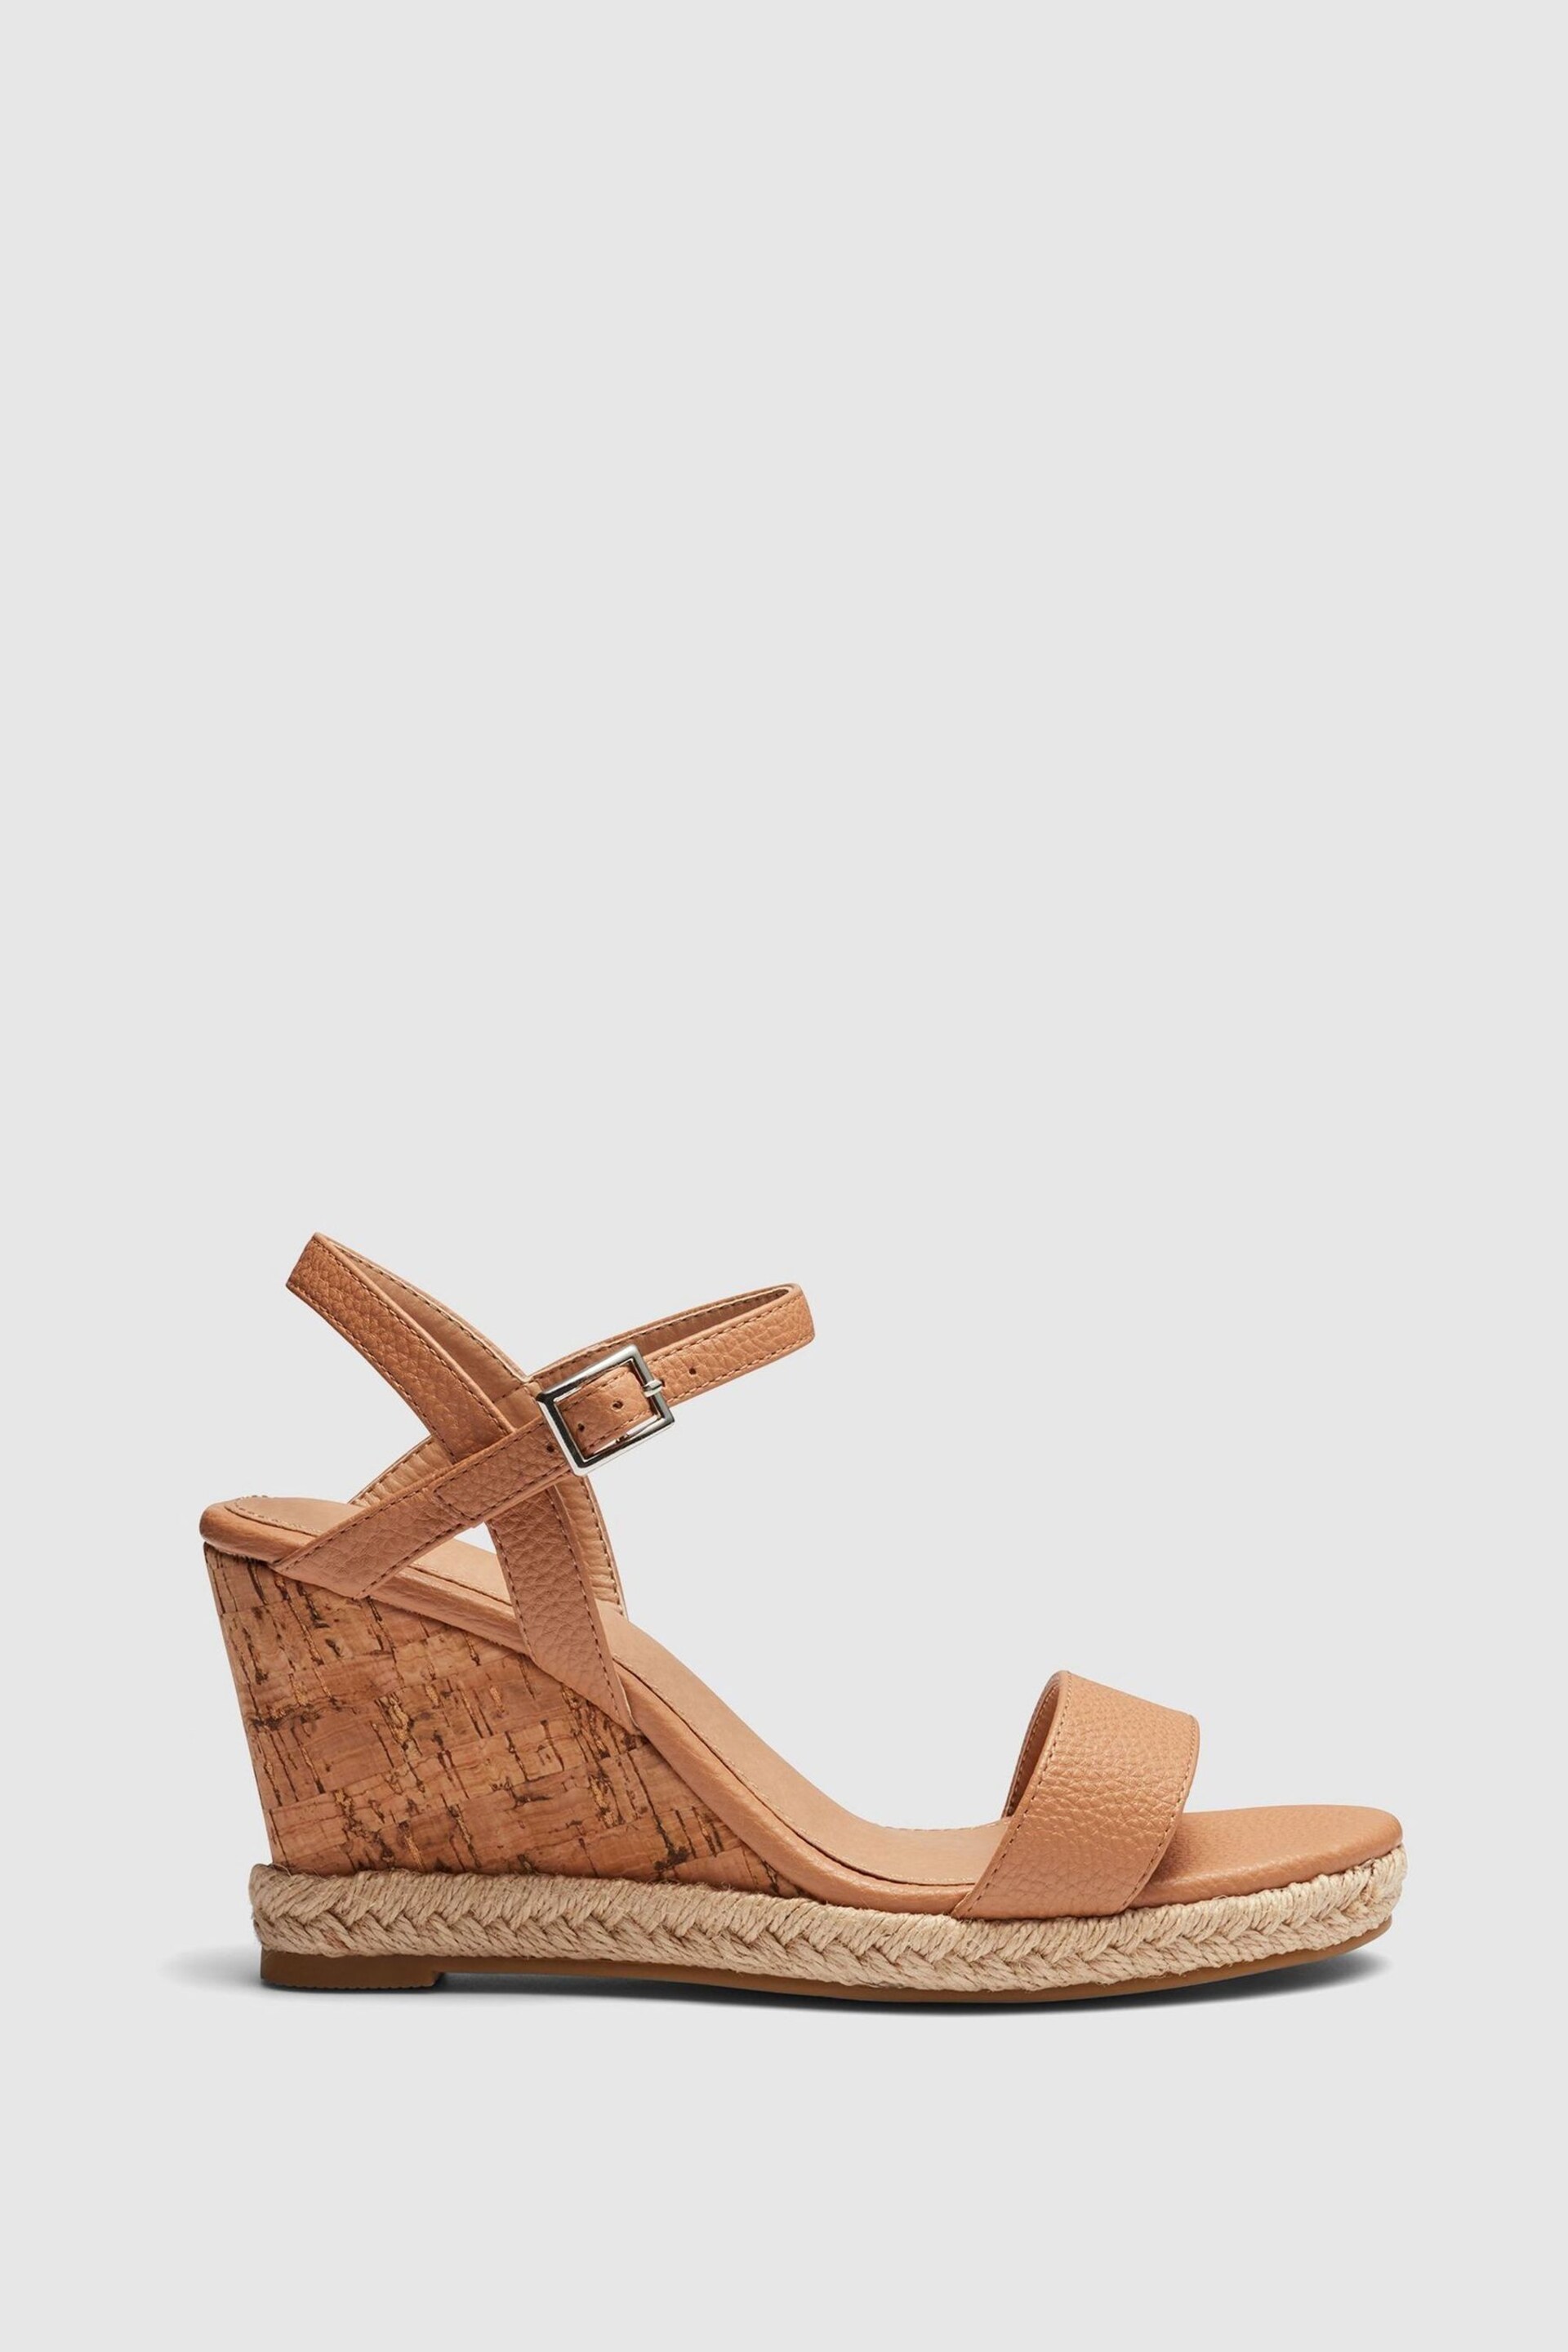 Novo Brown Wide Fit Booma Cork Wedge Sandals - Image 2 of 4